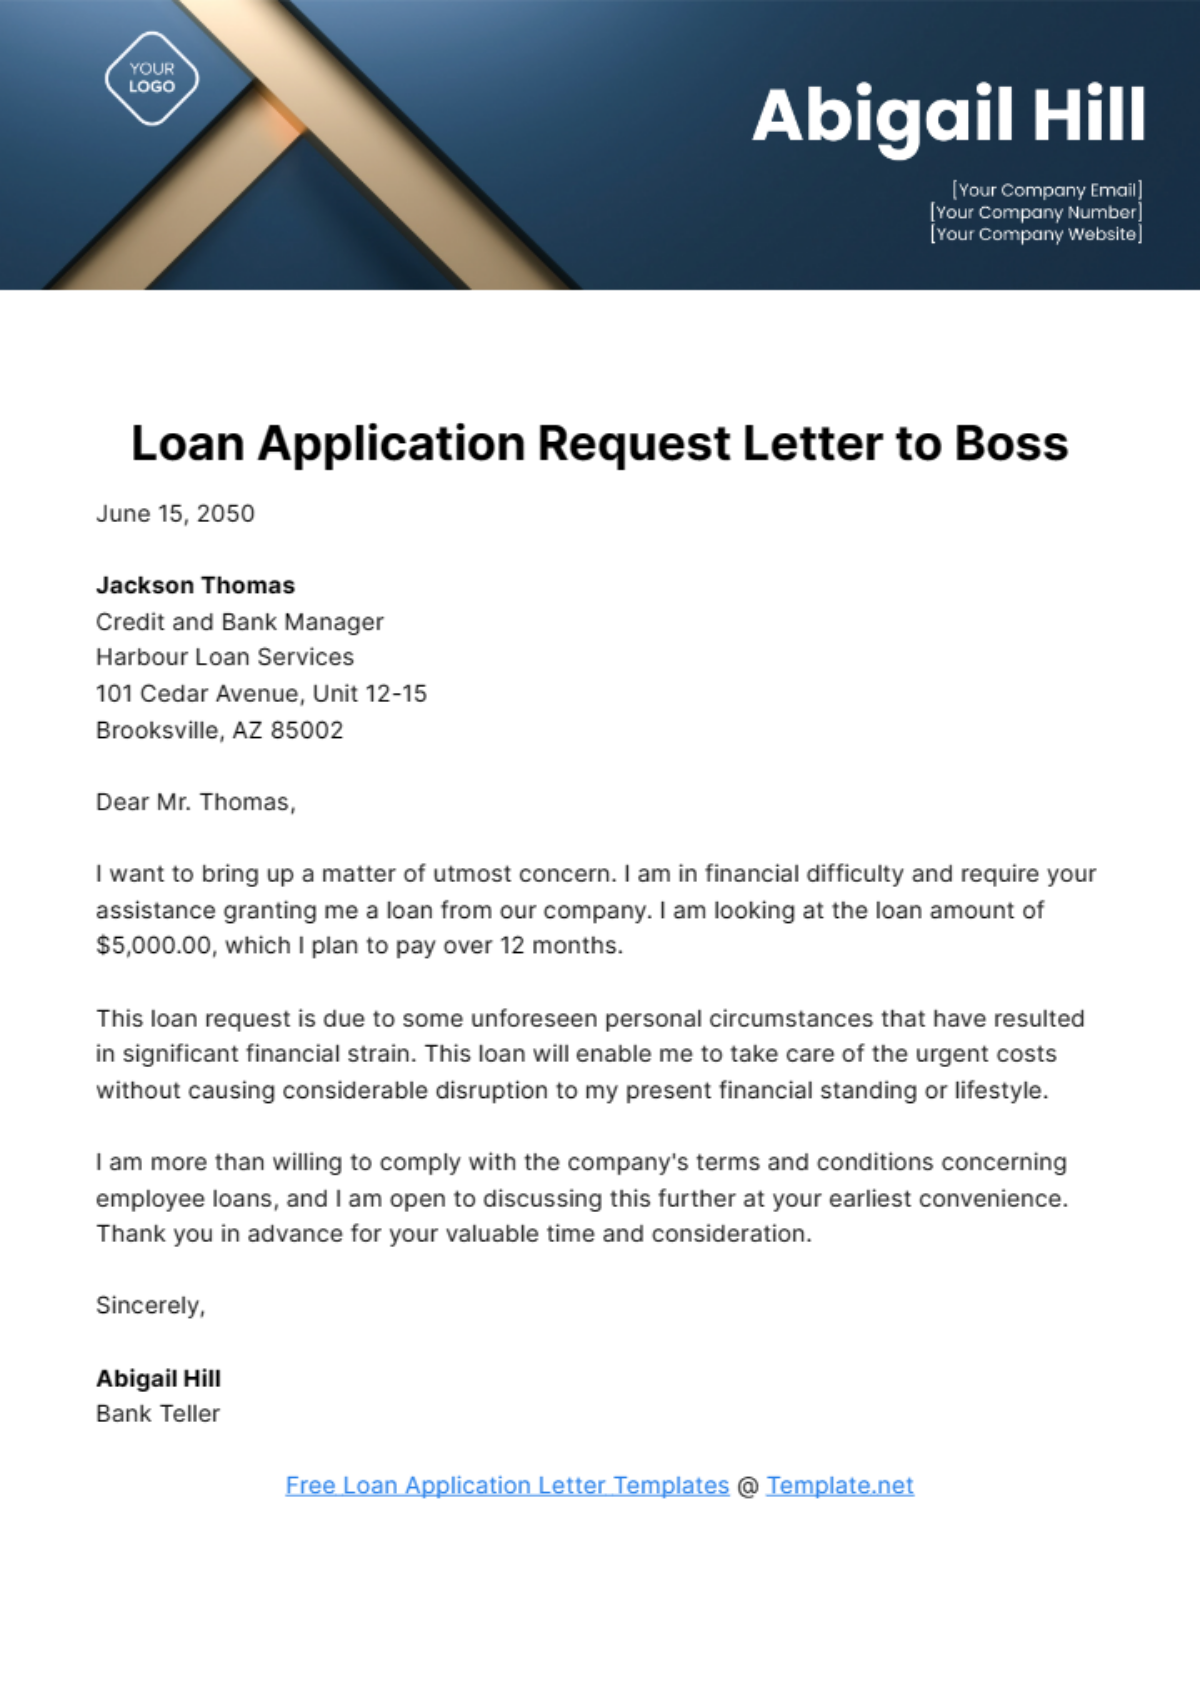 Loan Application Request Letter to Boss Template